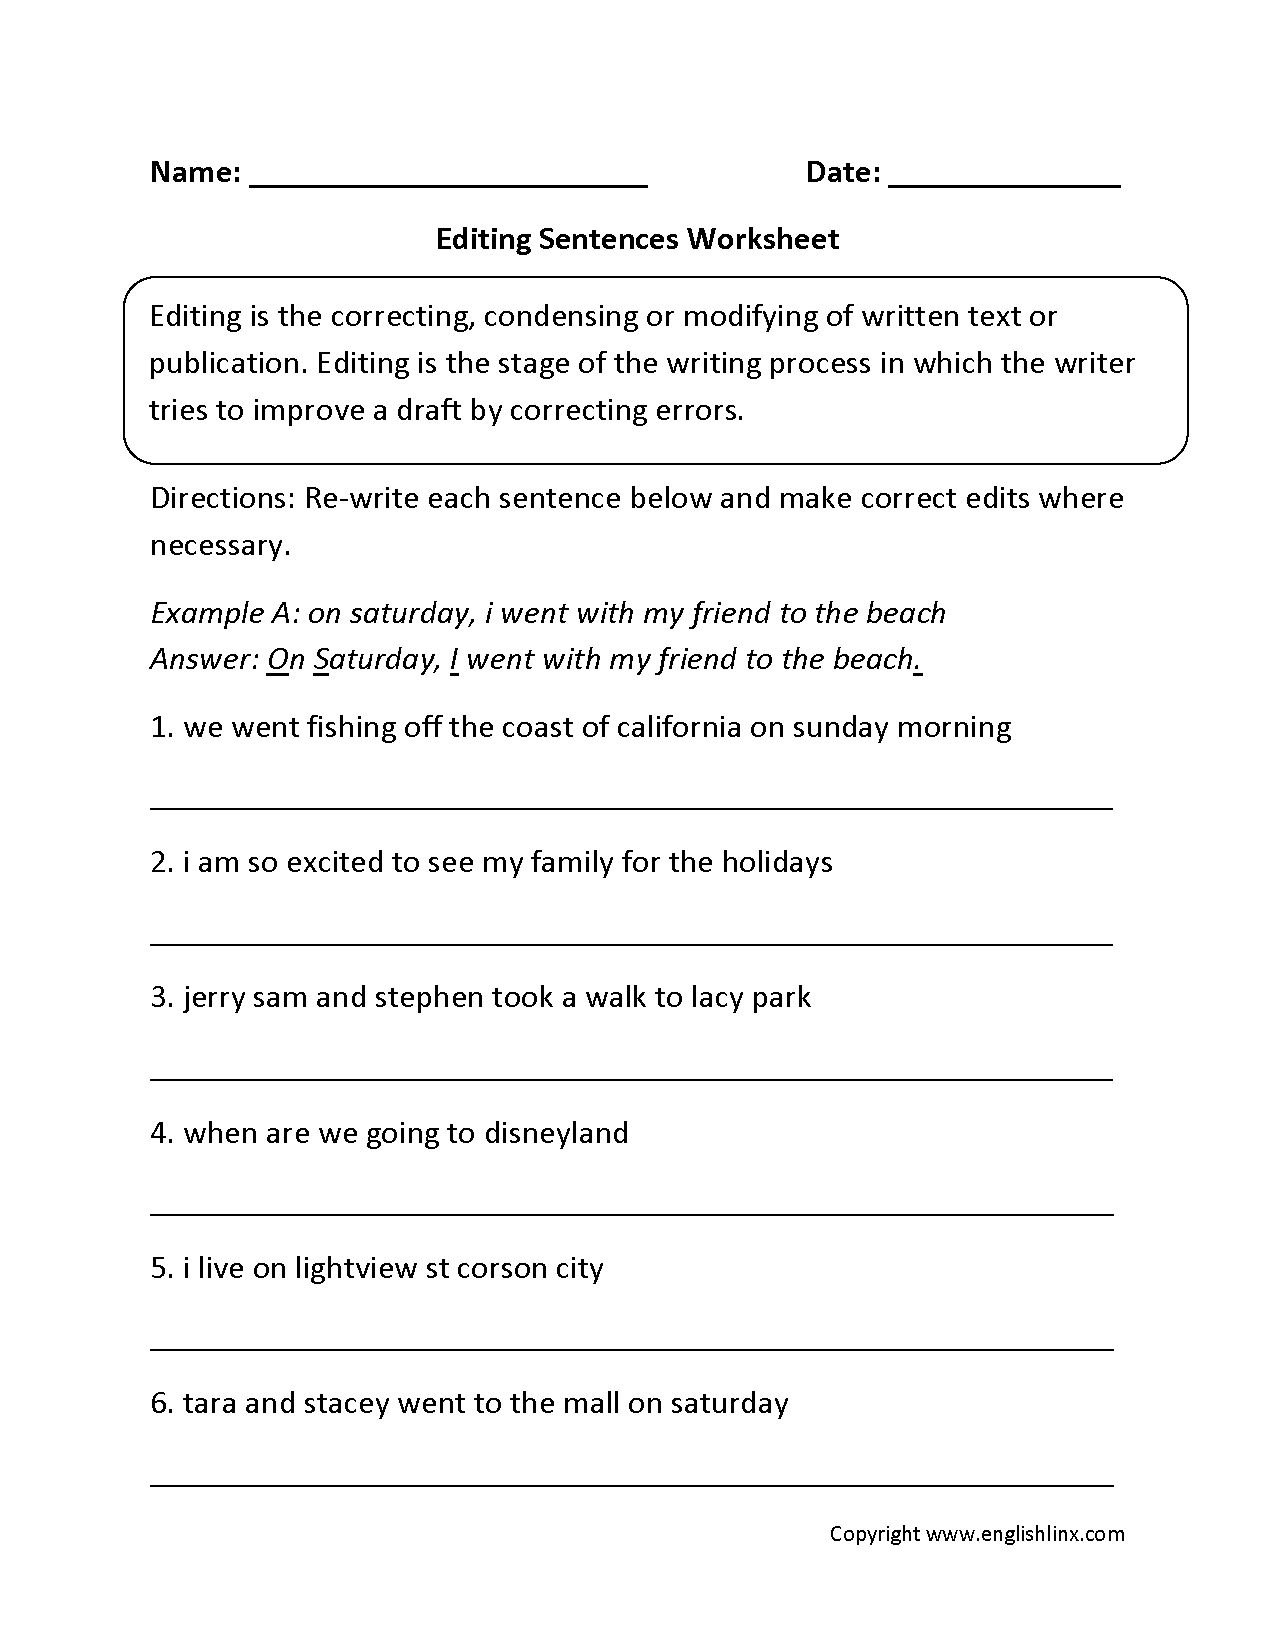 Writing Worksheets  Editing Worksheets As Well As Editing And Proofreading Worksheets